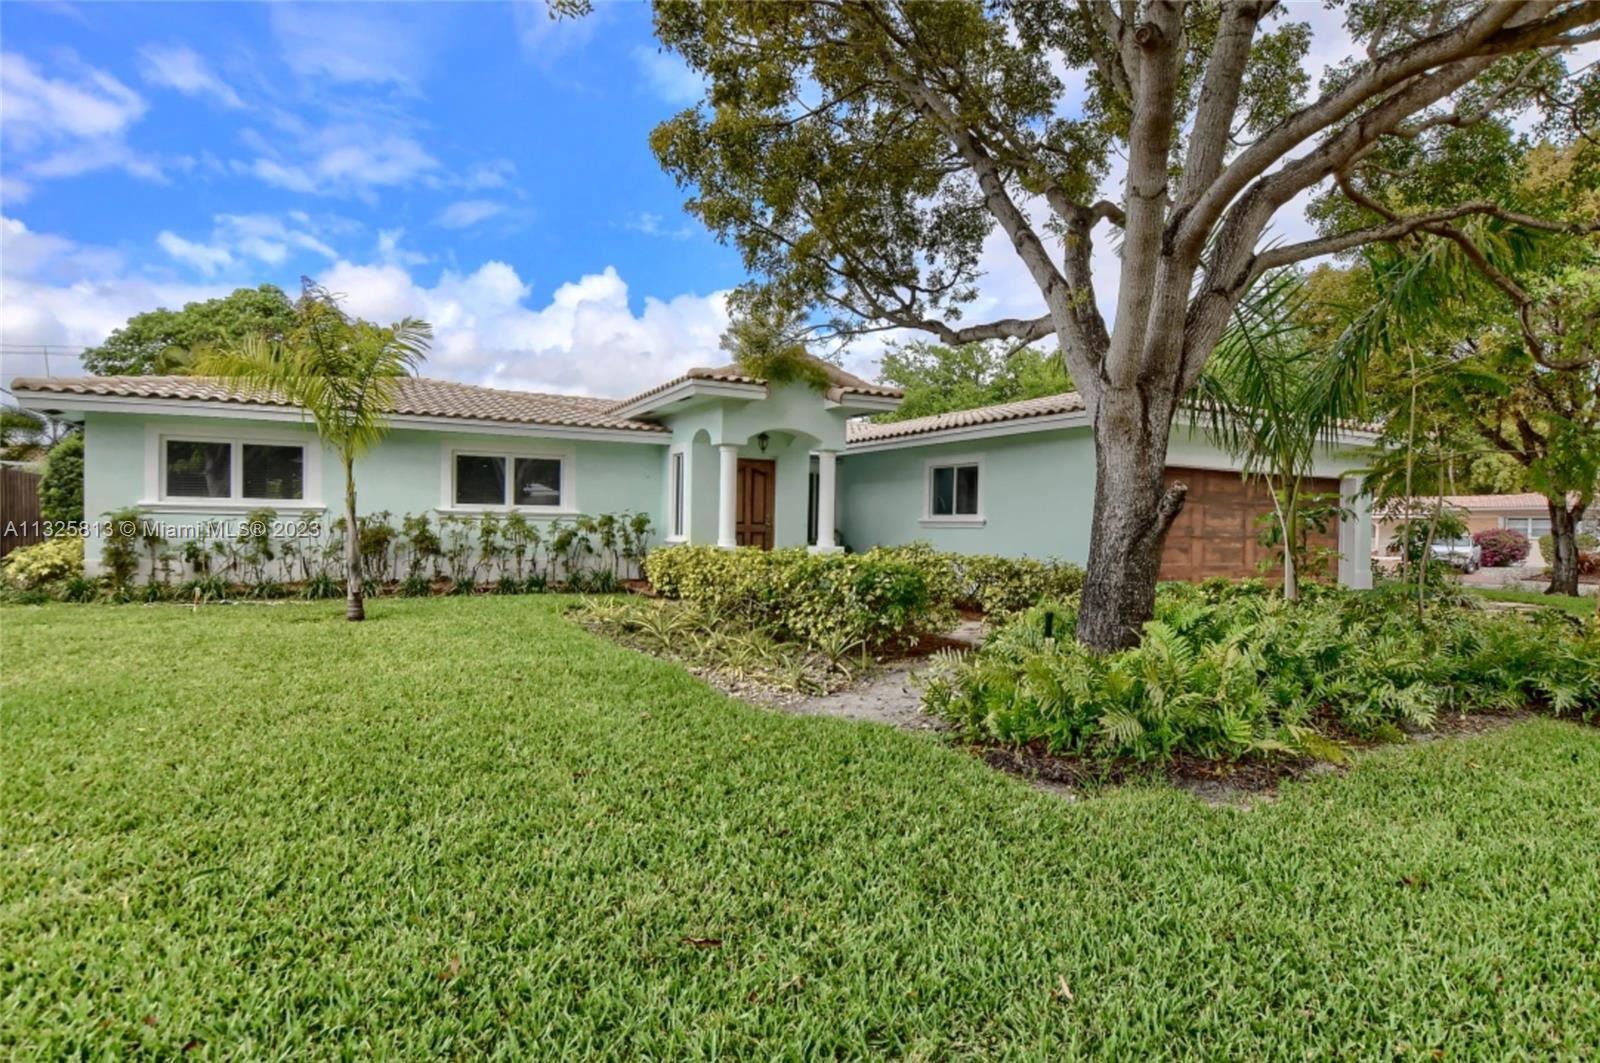 This home has a classic South Florida location in the heart of the Cove, close to fantastic restaura